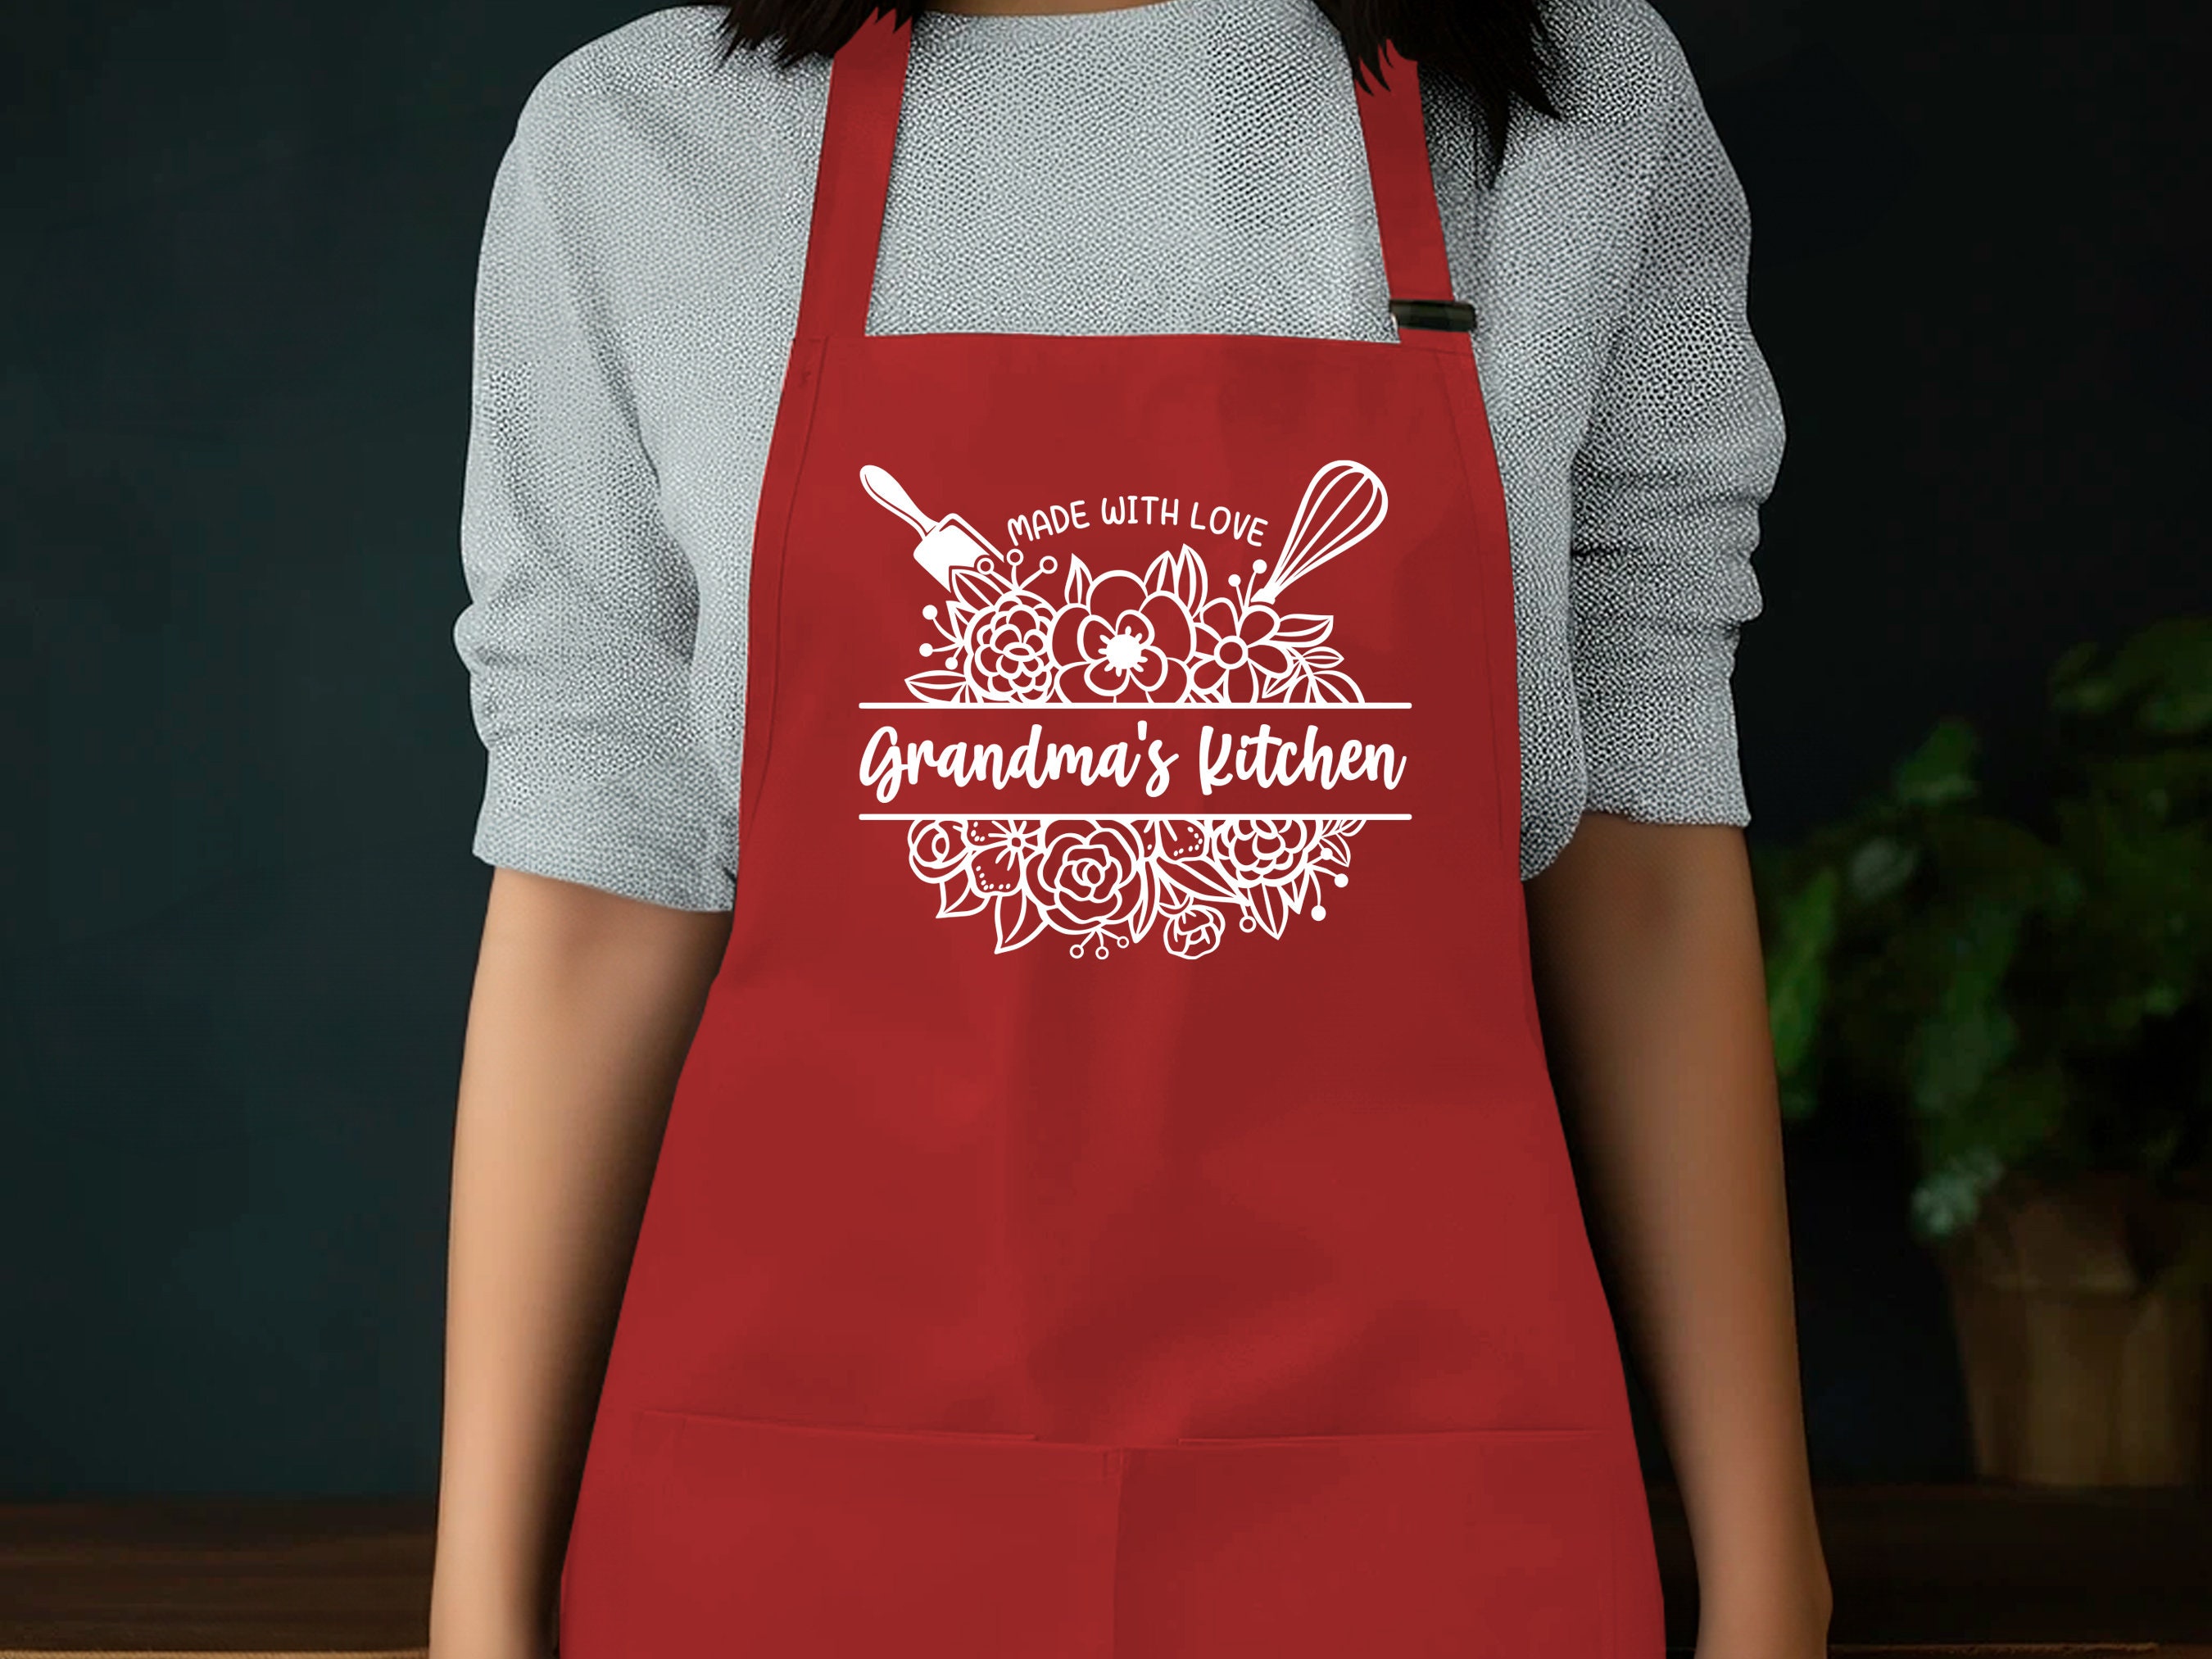 Discover Personalized Apron For Women, Personalized Apron, Mothers Day Gift, Kitchen Apron, Gift For Mom, Gift For Grandma, Gift for Her, Cute Apron